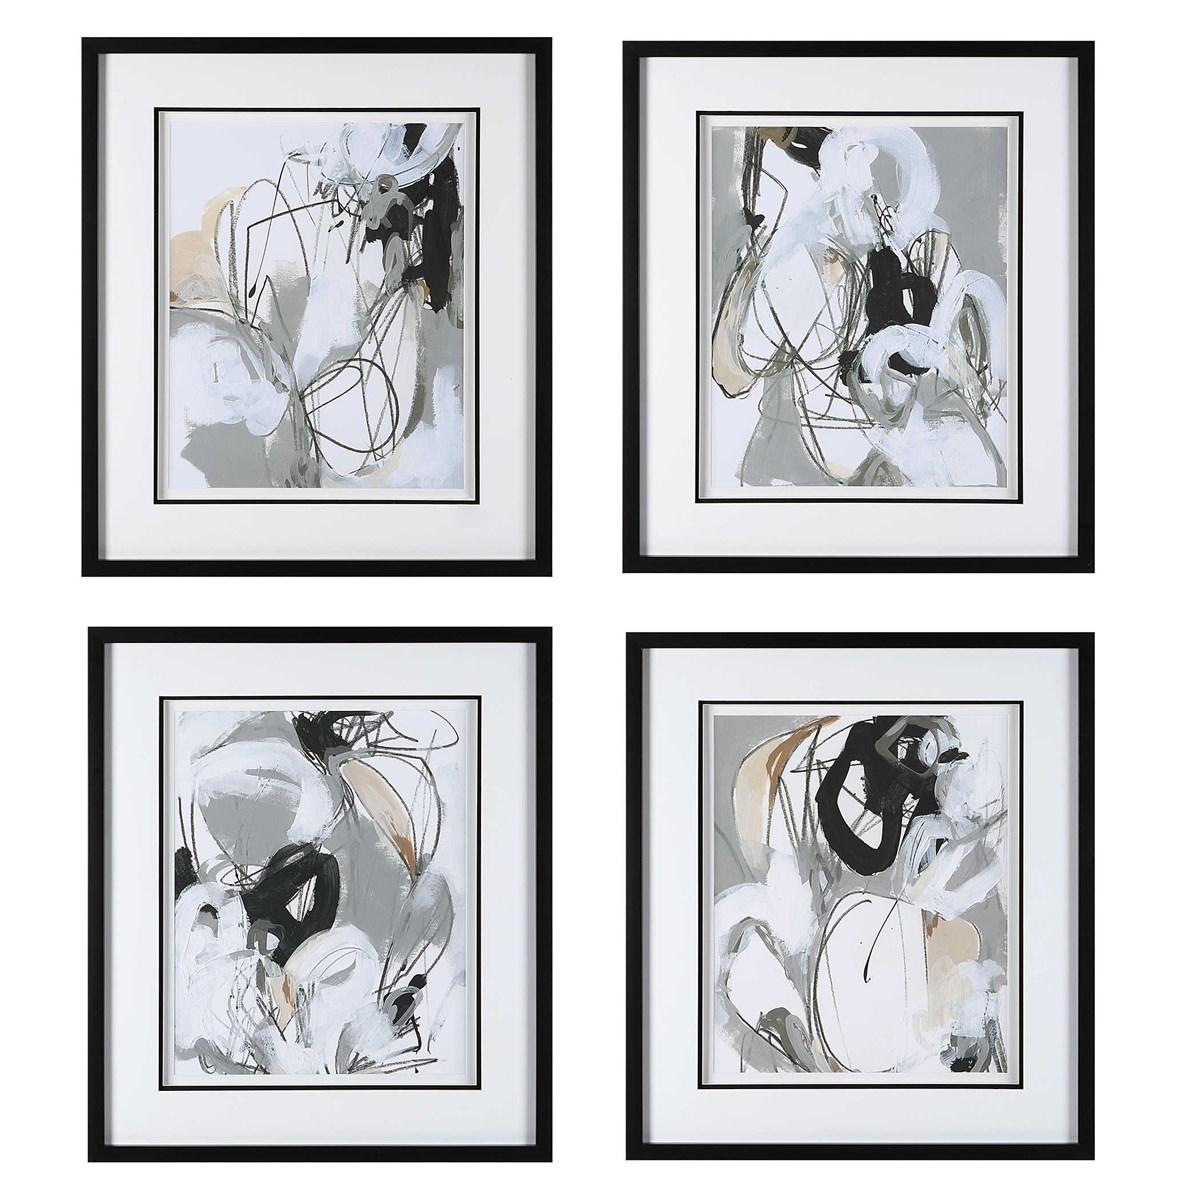 Tangled Threads Abstract Framed Prints, S/4 - Image 3